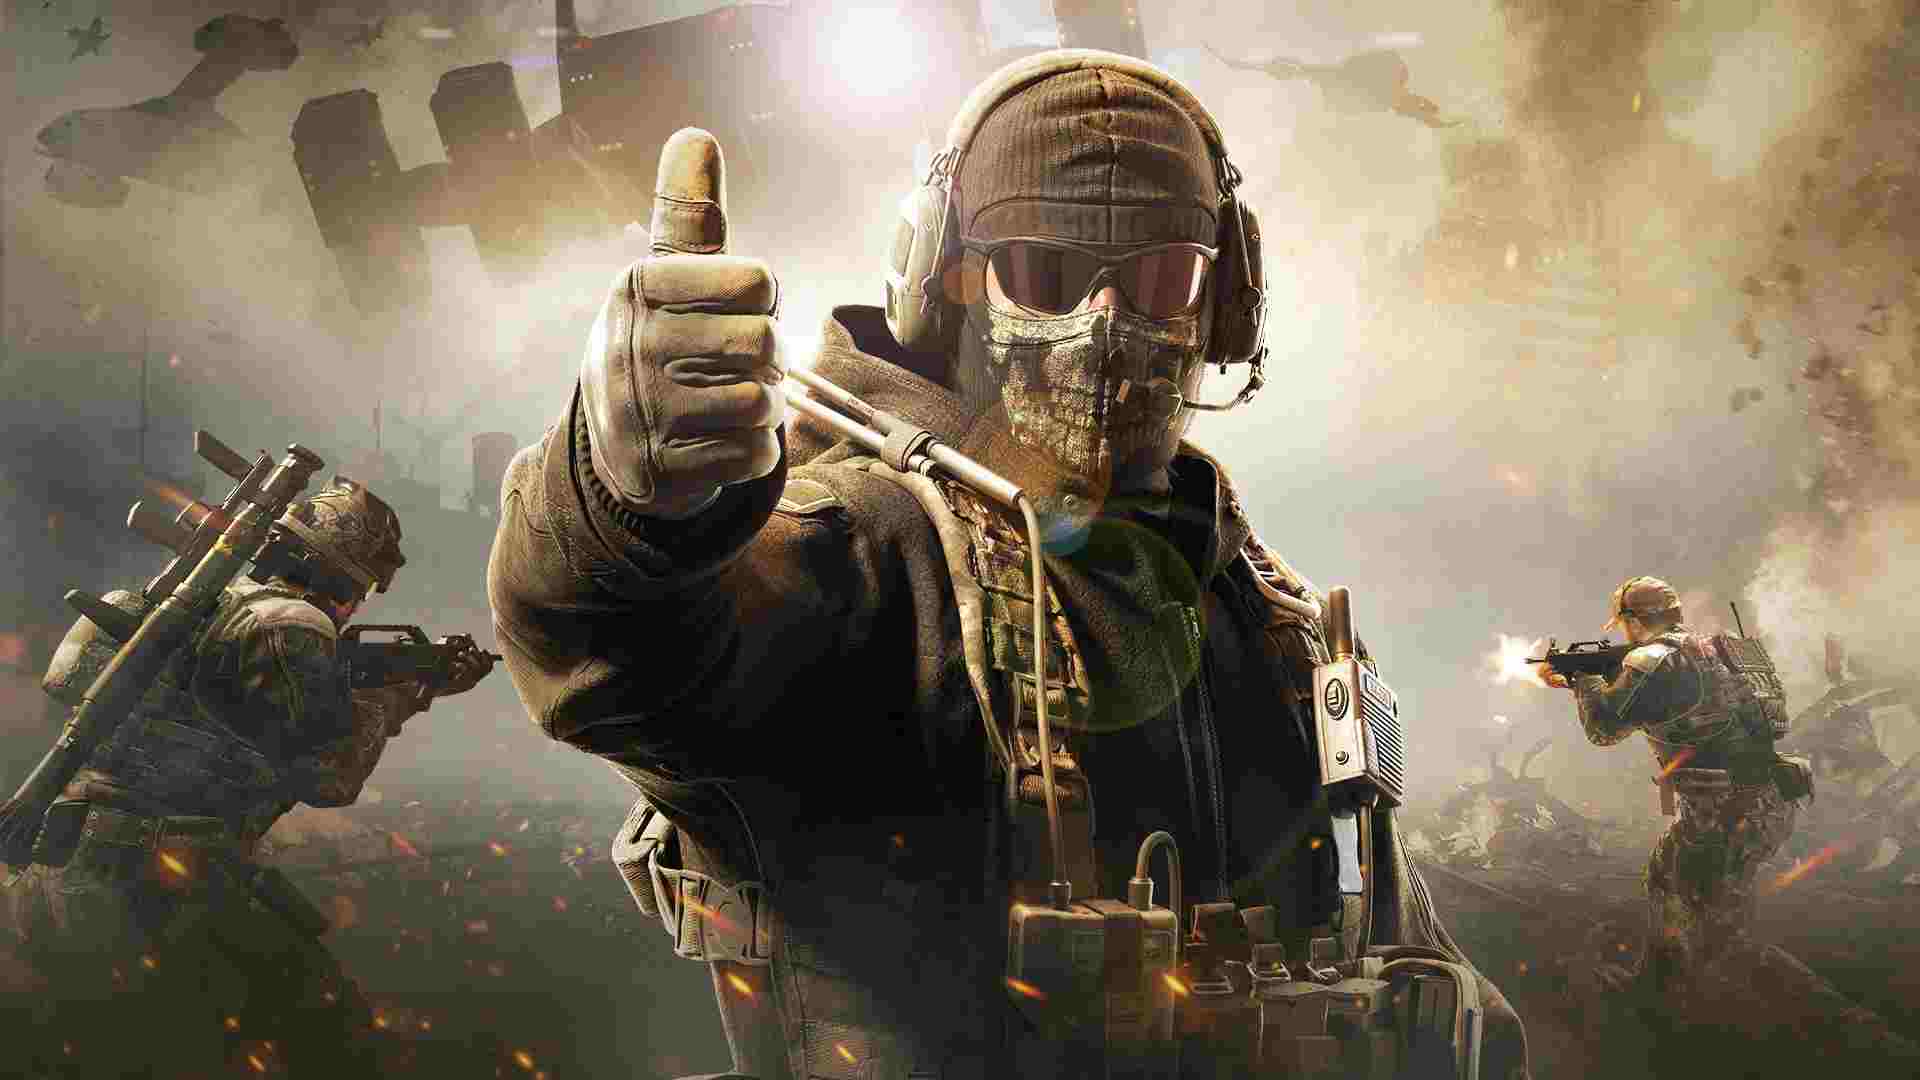 Call Of Duty Warzone Mobile Listing Points To Late 2023 Release - GameSpot